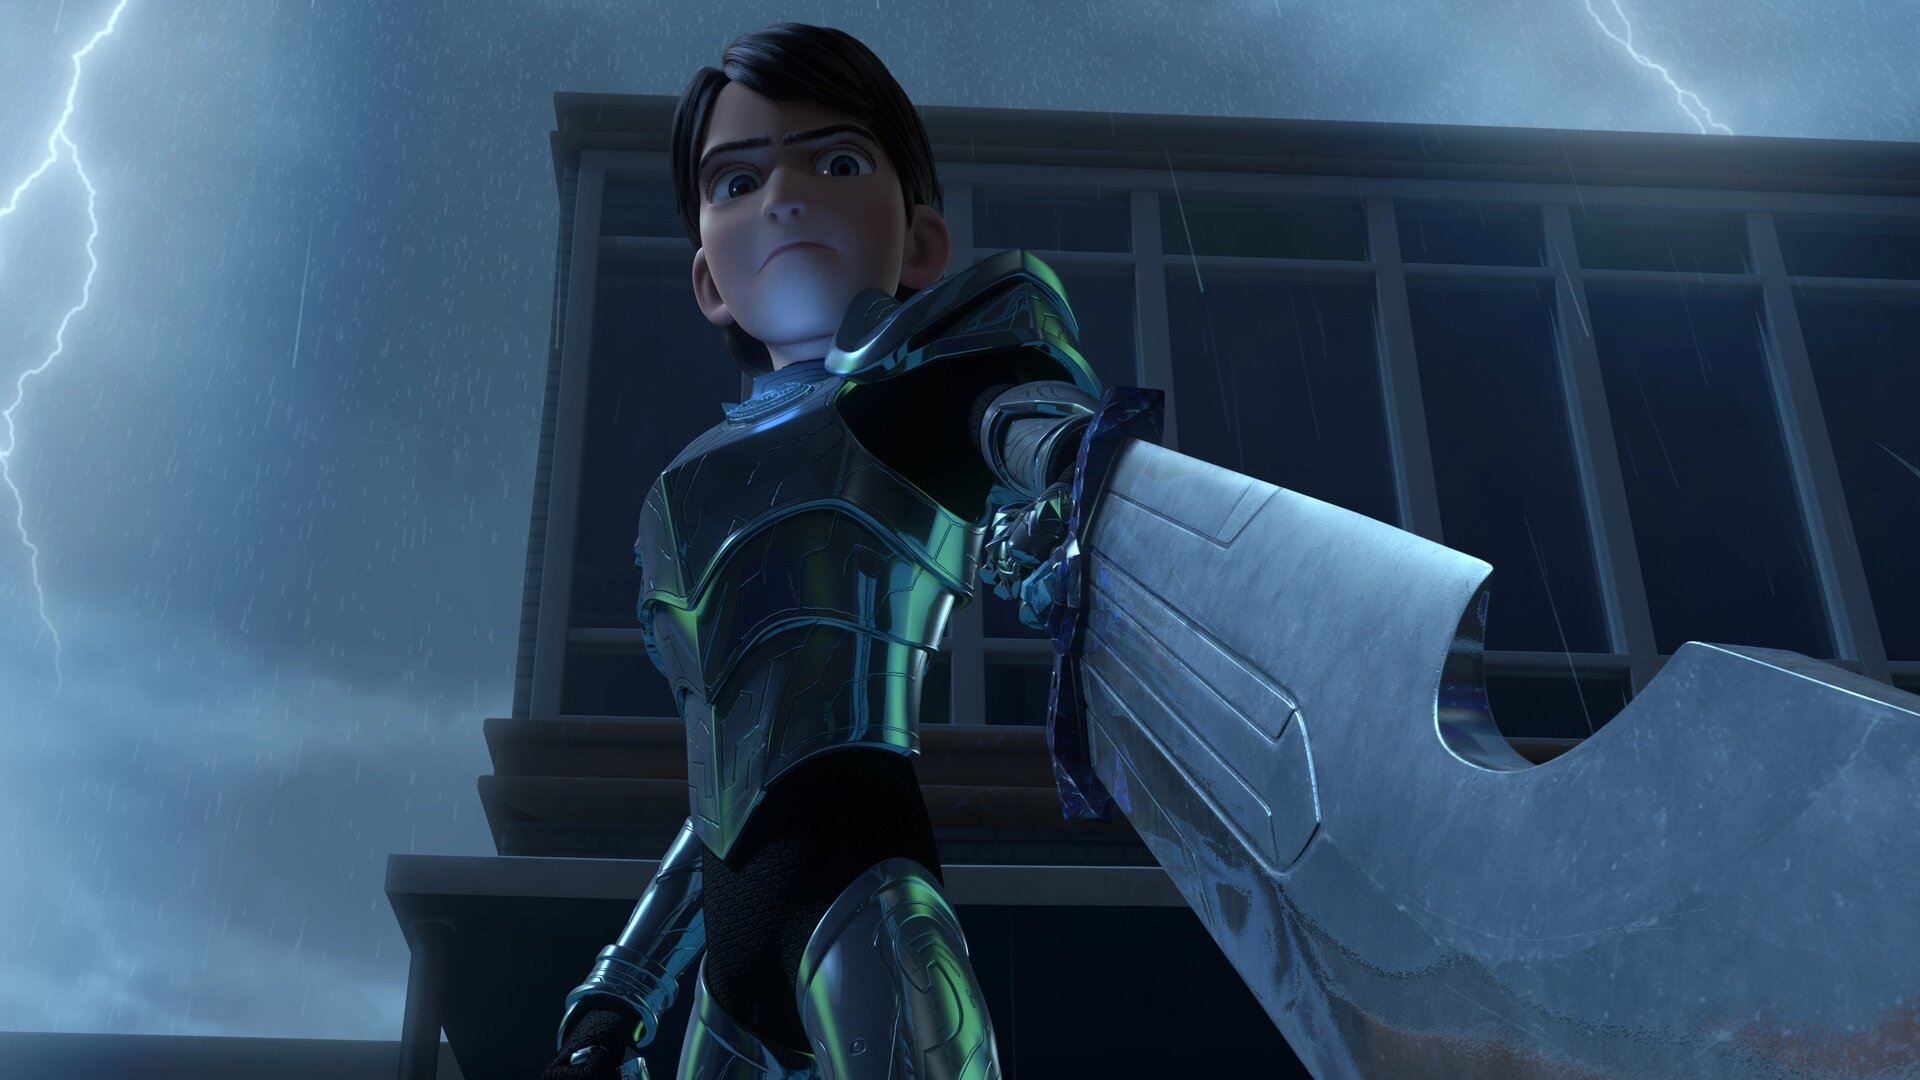 Guillermo del Toro's TROLLHUNTERS: RISE OF THE TITANS Film Has Been An...